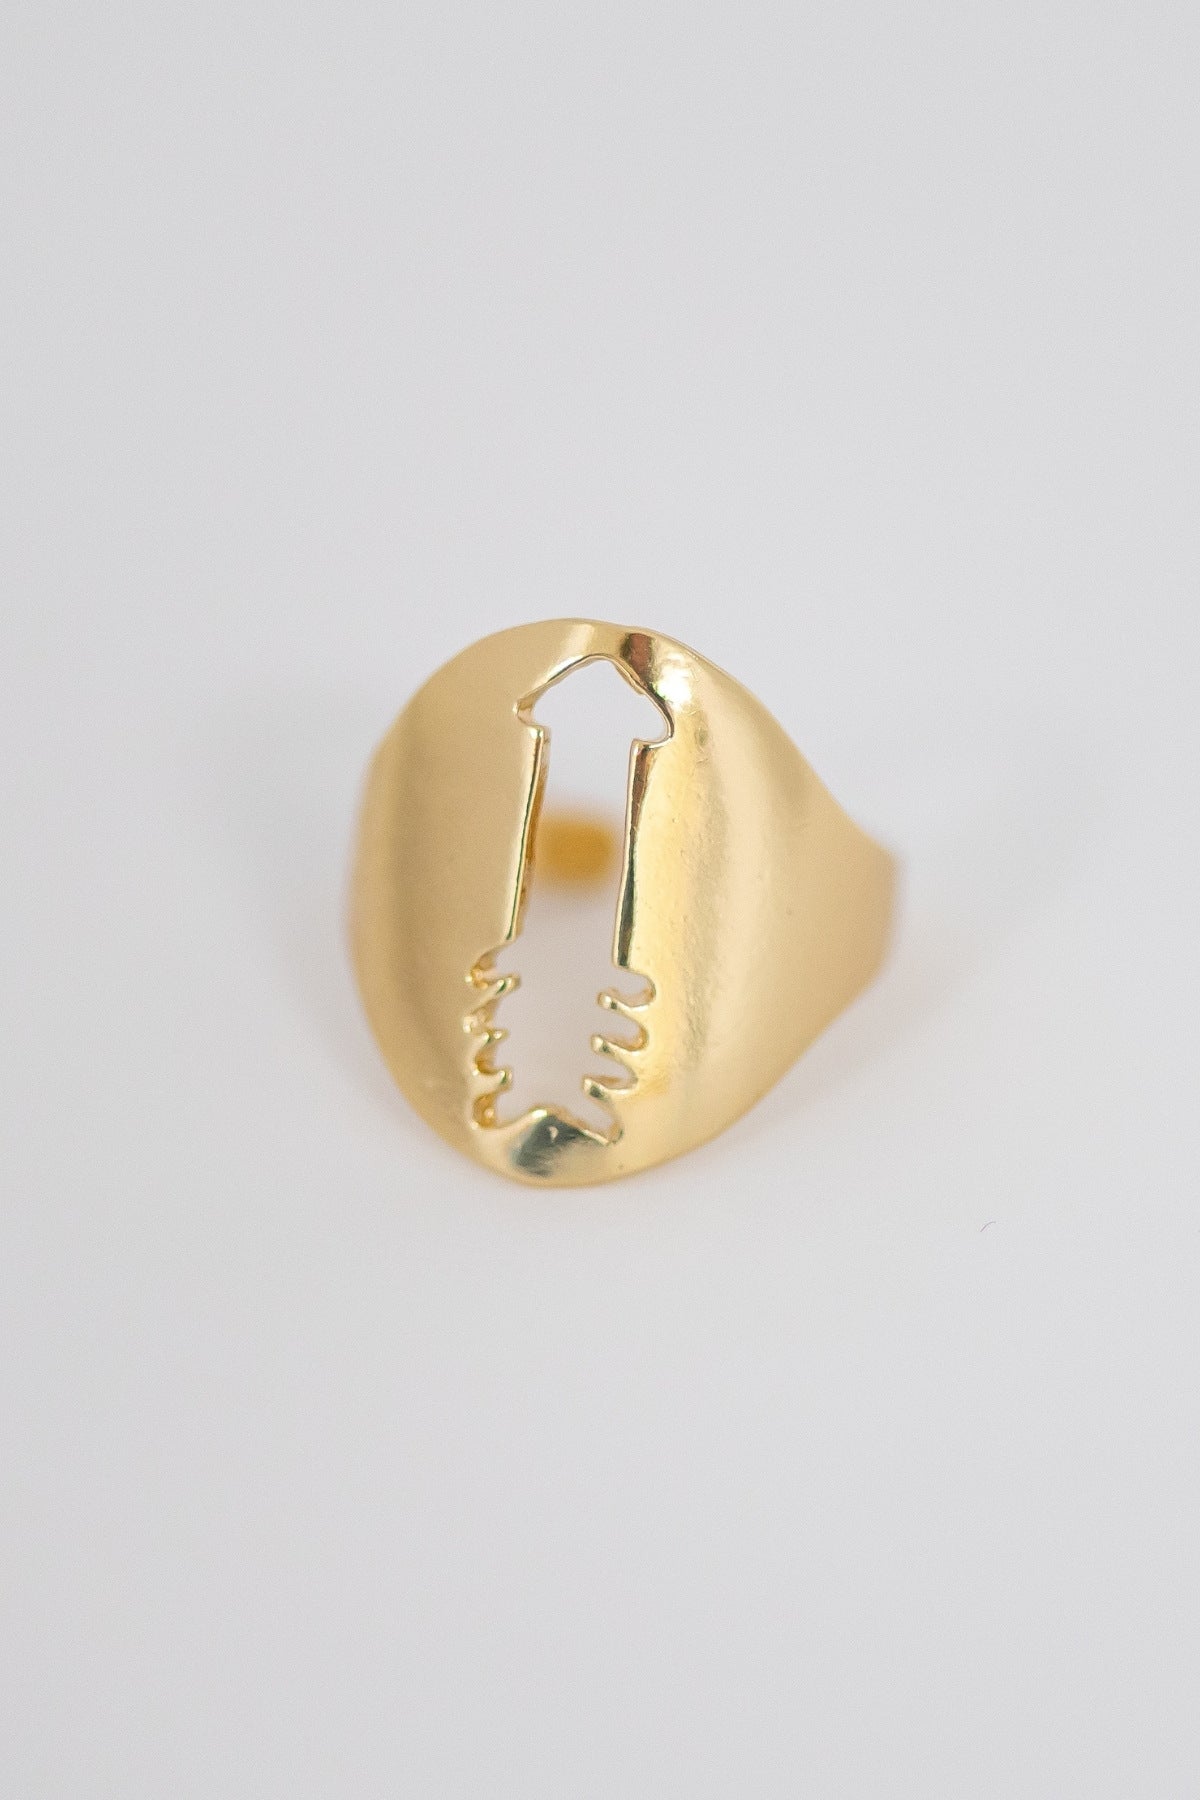 Women's Gold Ring with Arrow Cutout